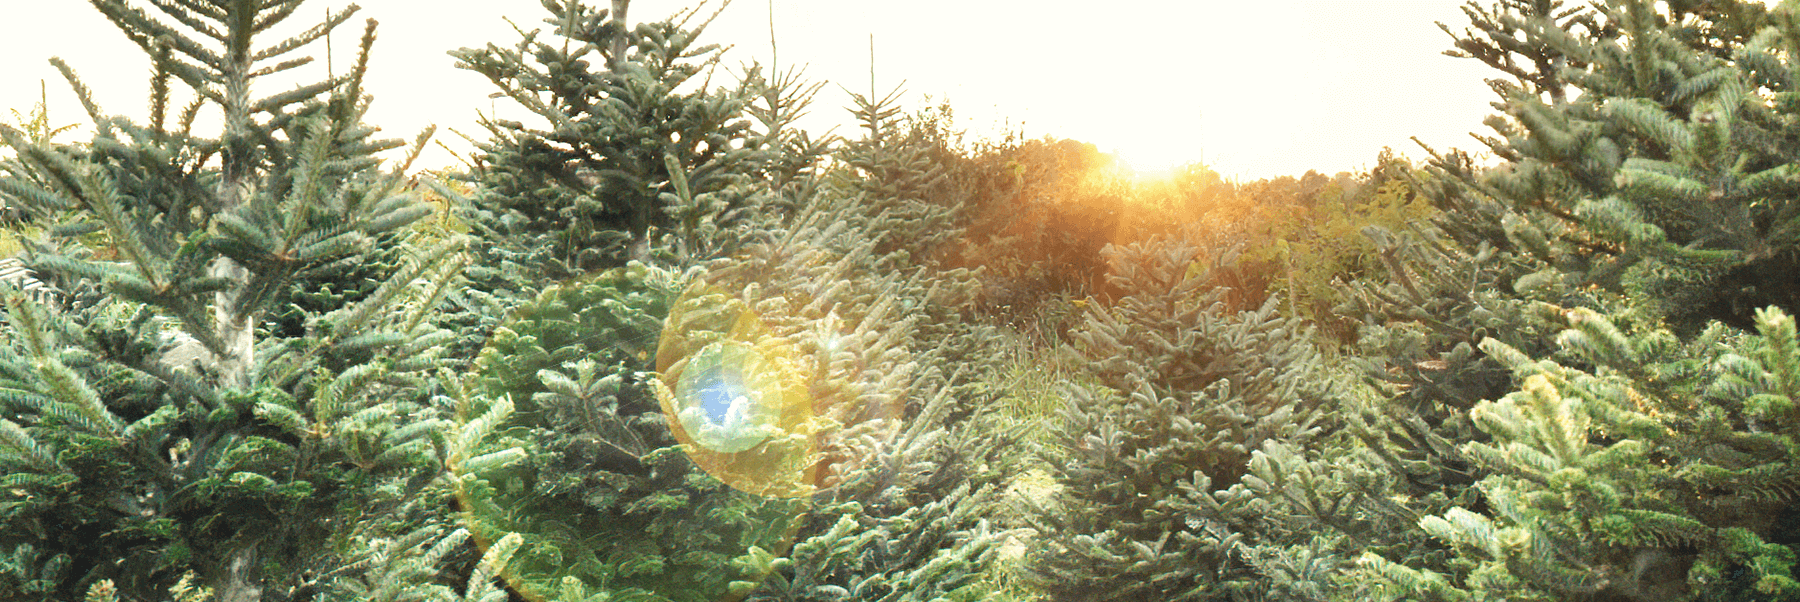 A field of Christmas trees with the sun shining in the background